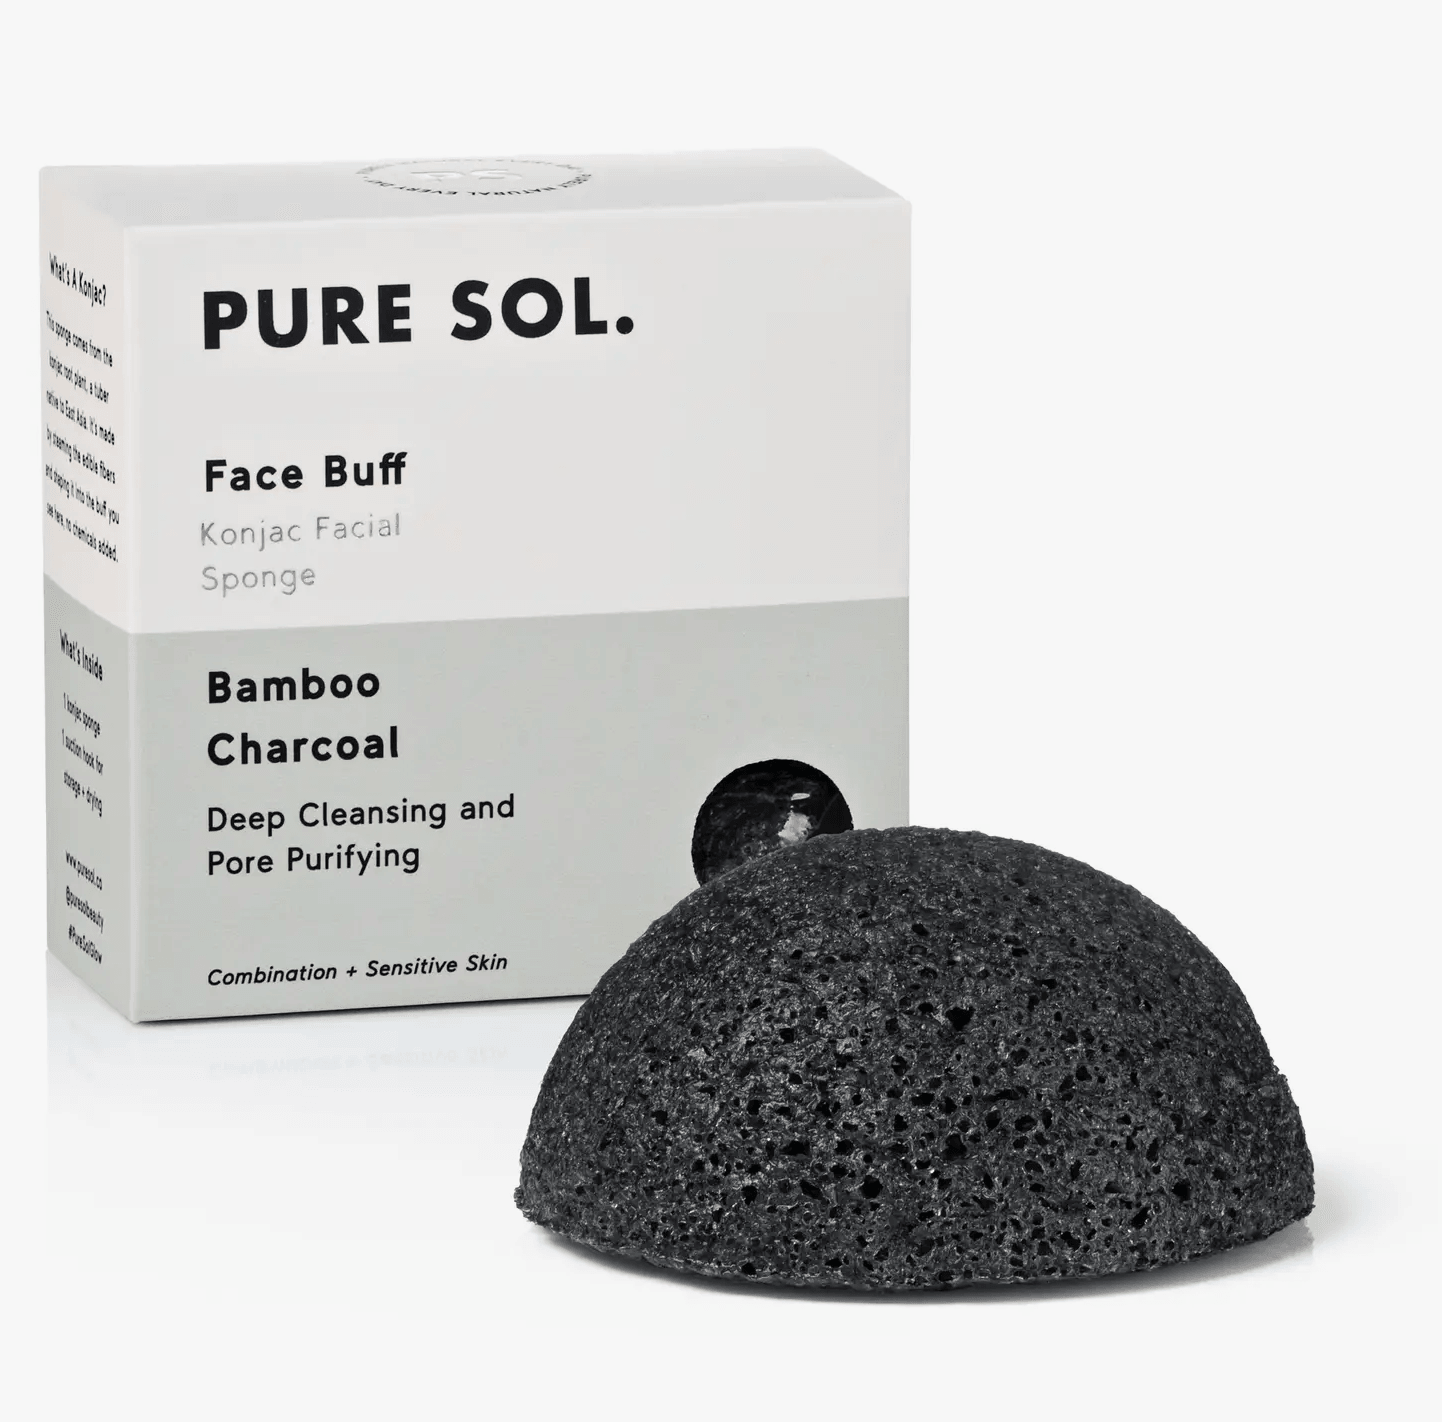 Charcoal and Konjac Facial Sponge by Pure Sol - Haven